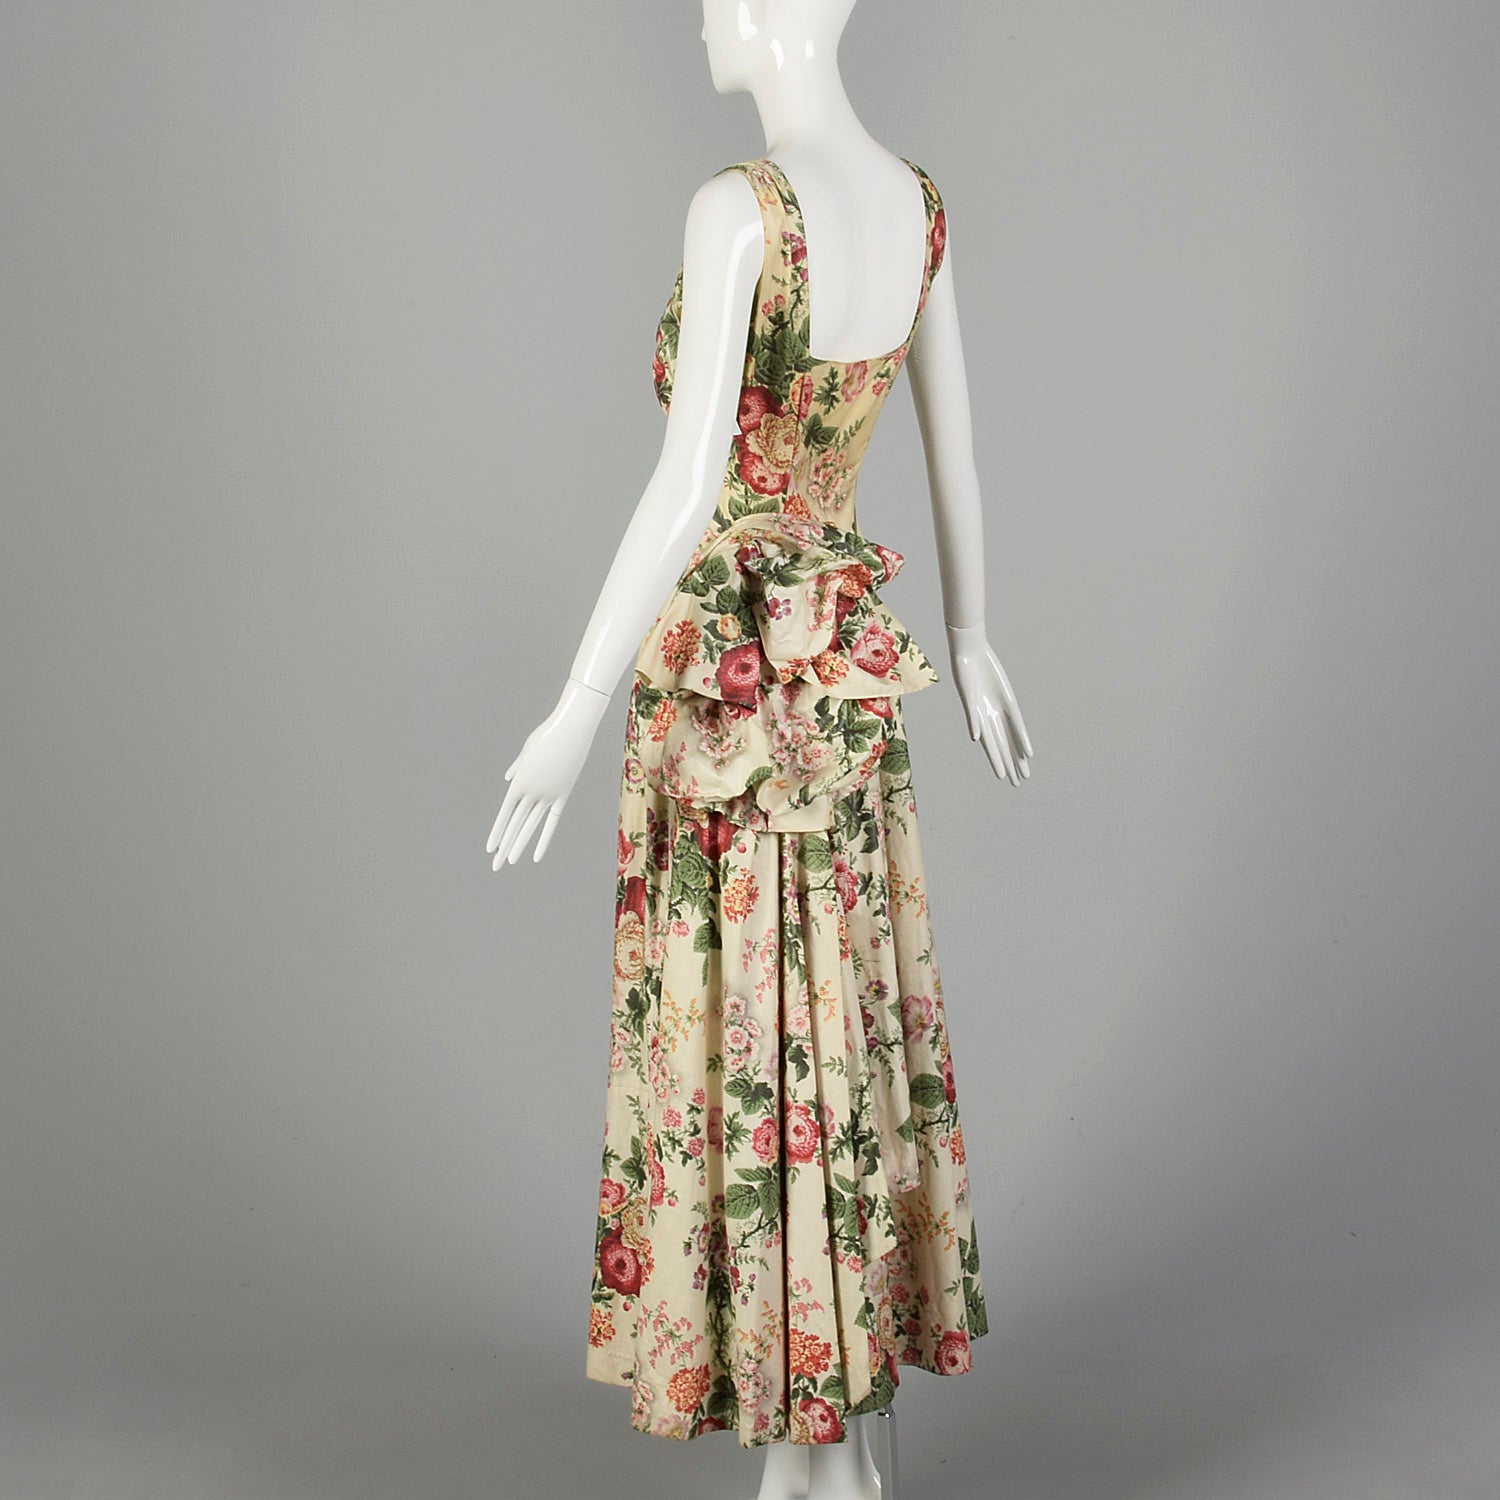 Medium 1940s Sleeveless Floral Spring Dress Ruched Bust